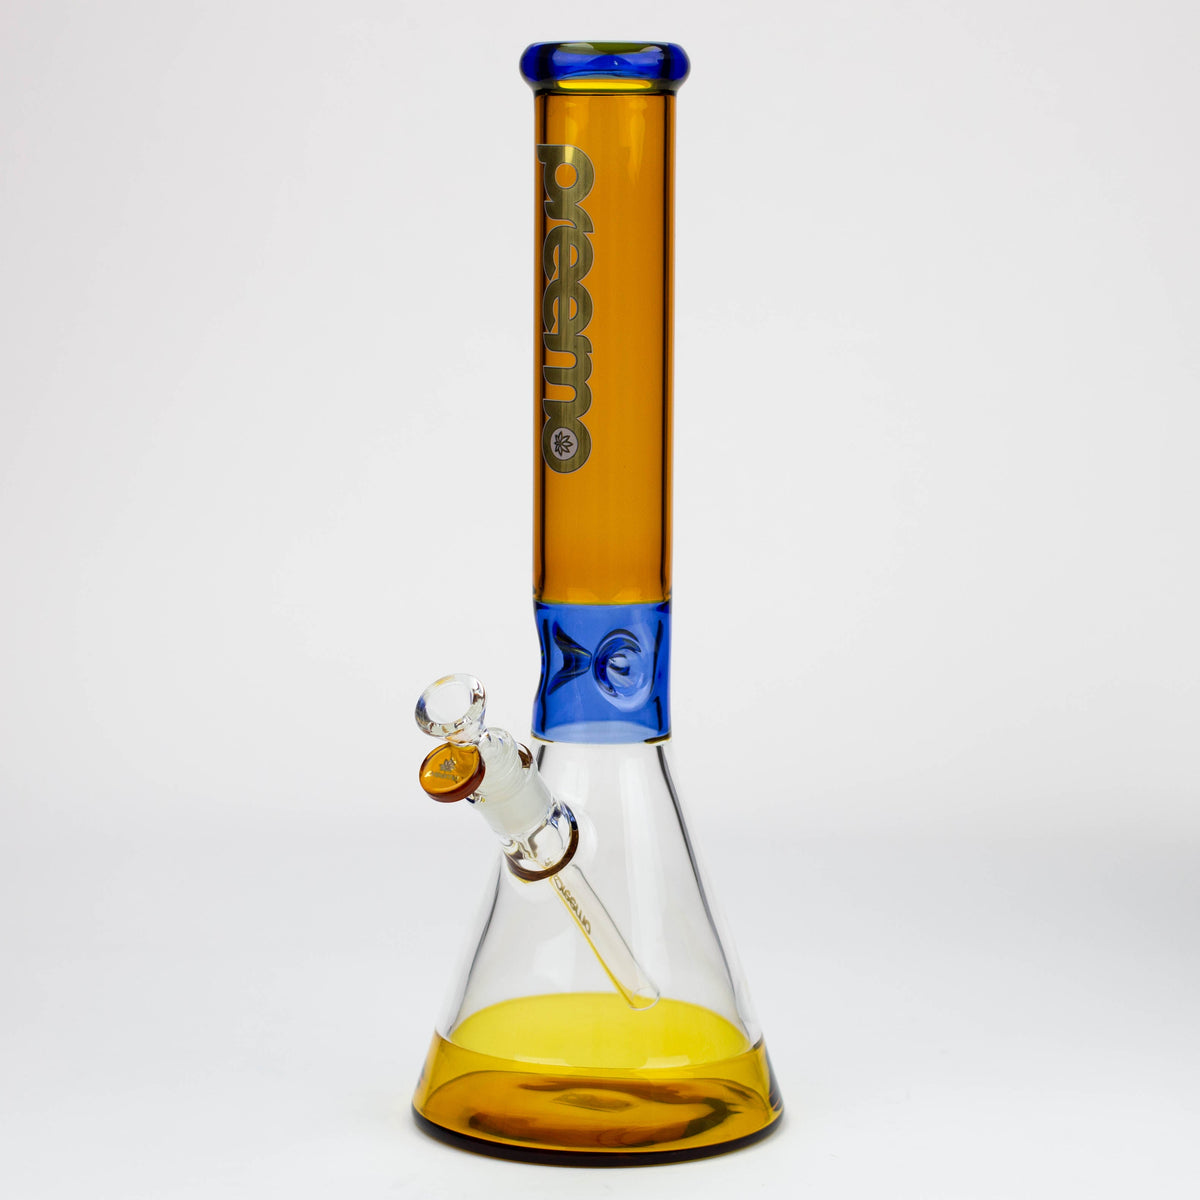 Preemo 15.5 Contrast Beaker gold with violet accents